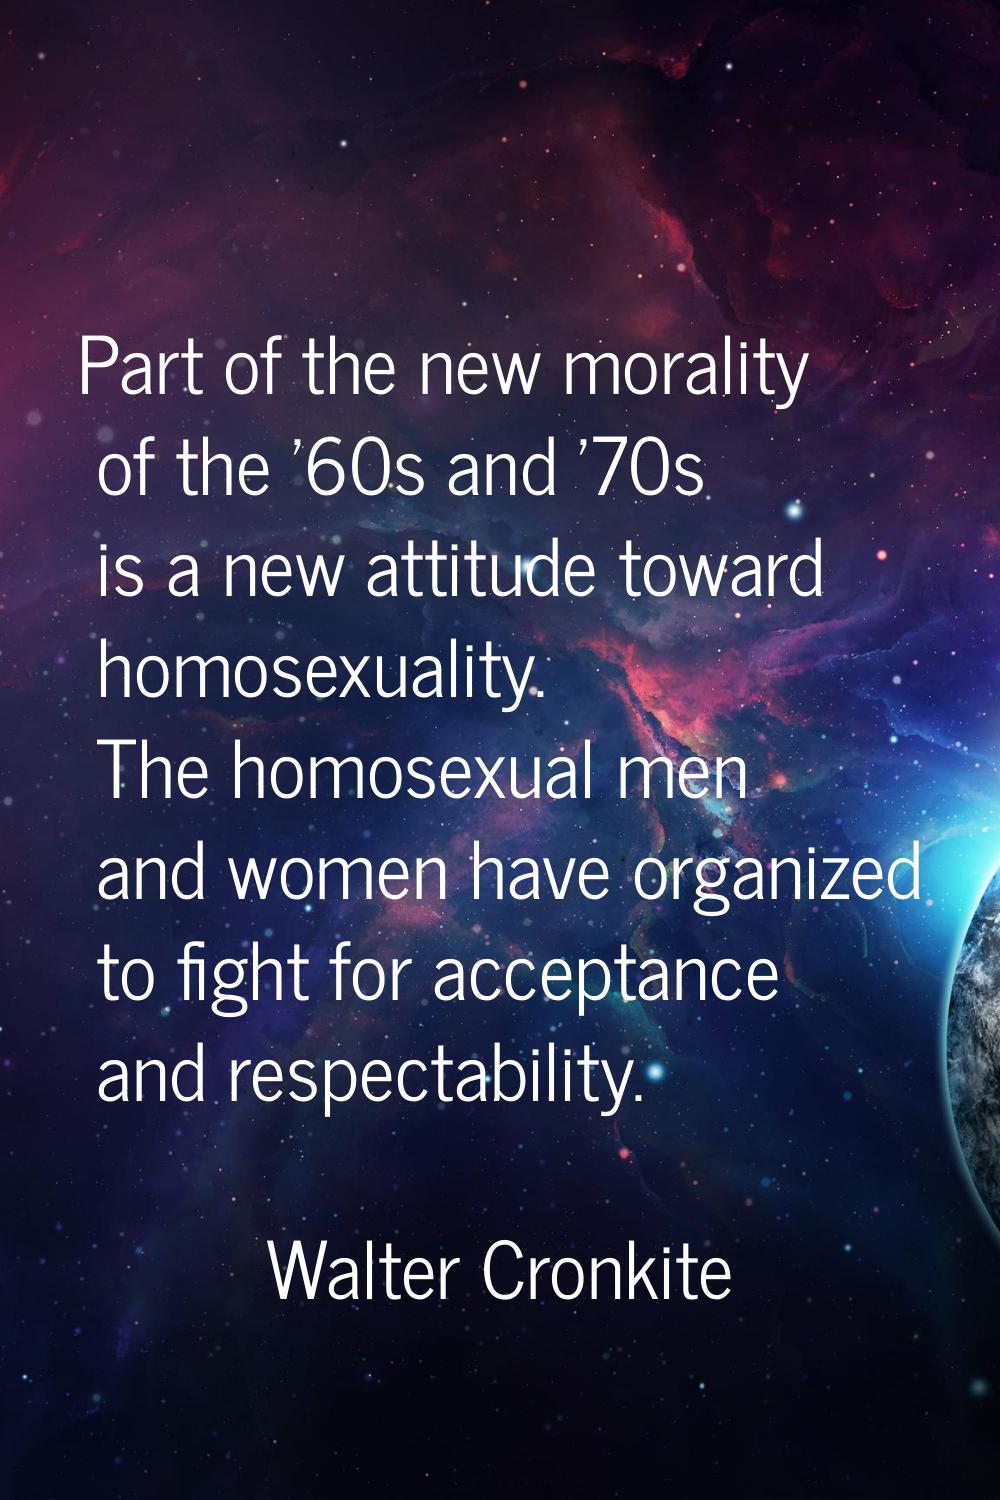 Part of the new morality of the '60s and '70s is a new attitude toward homosexuality. The homosexua